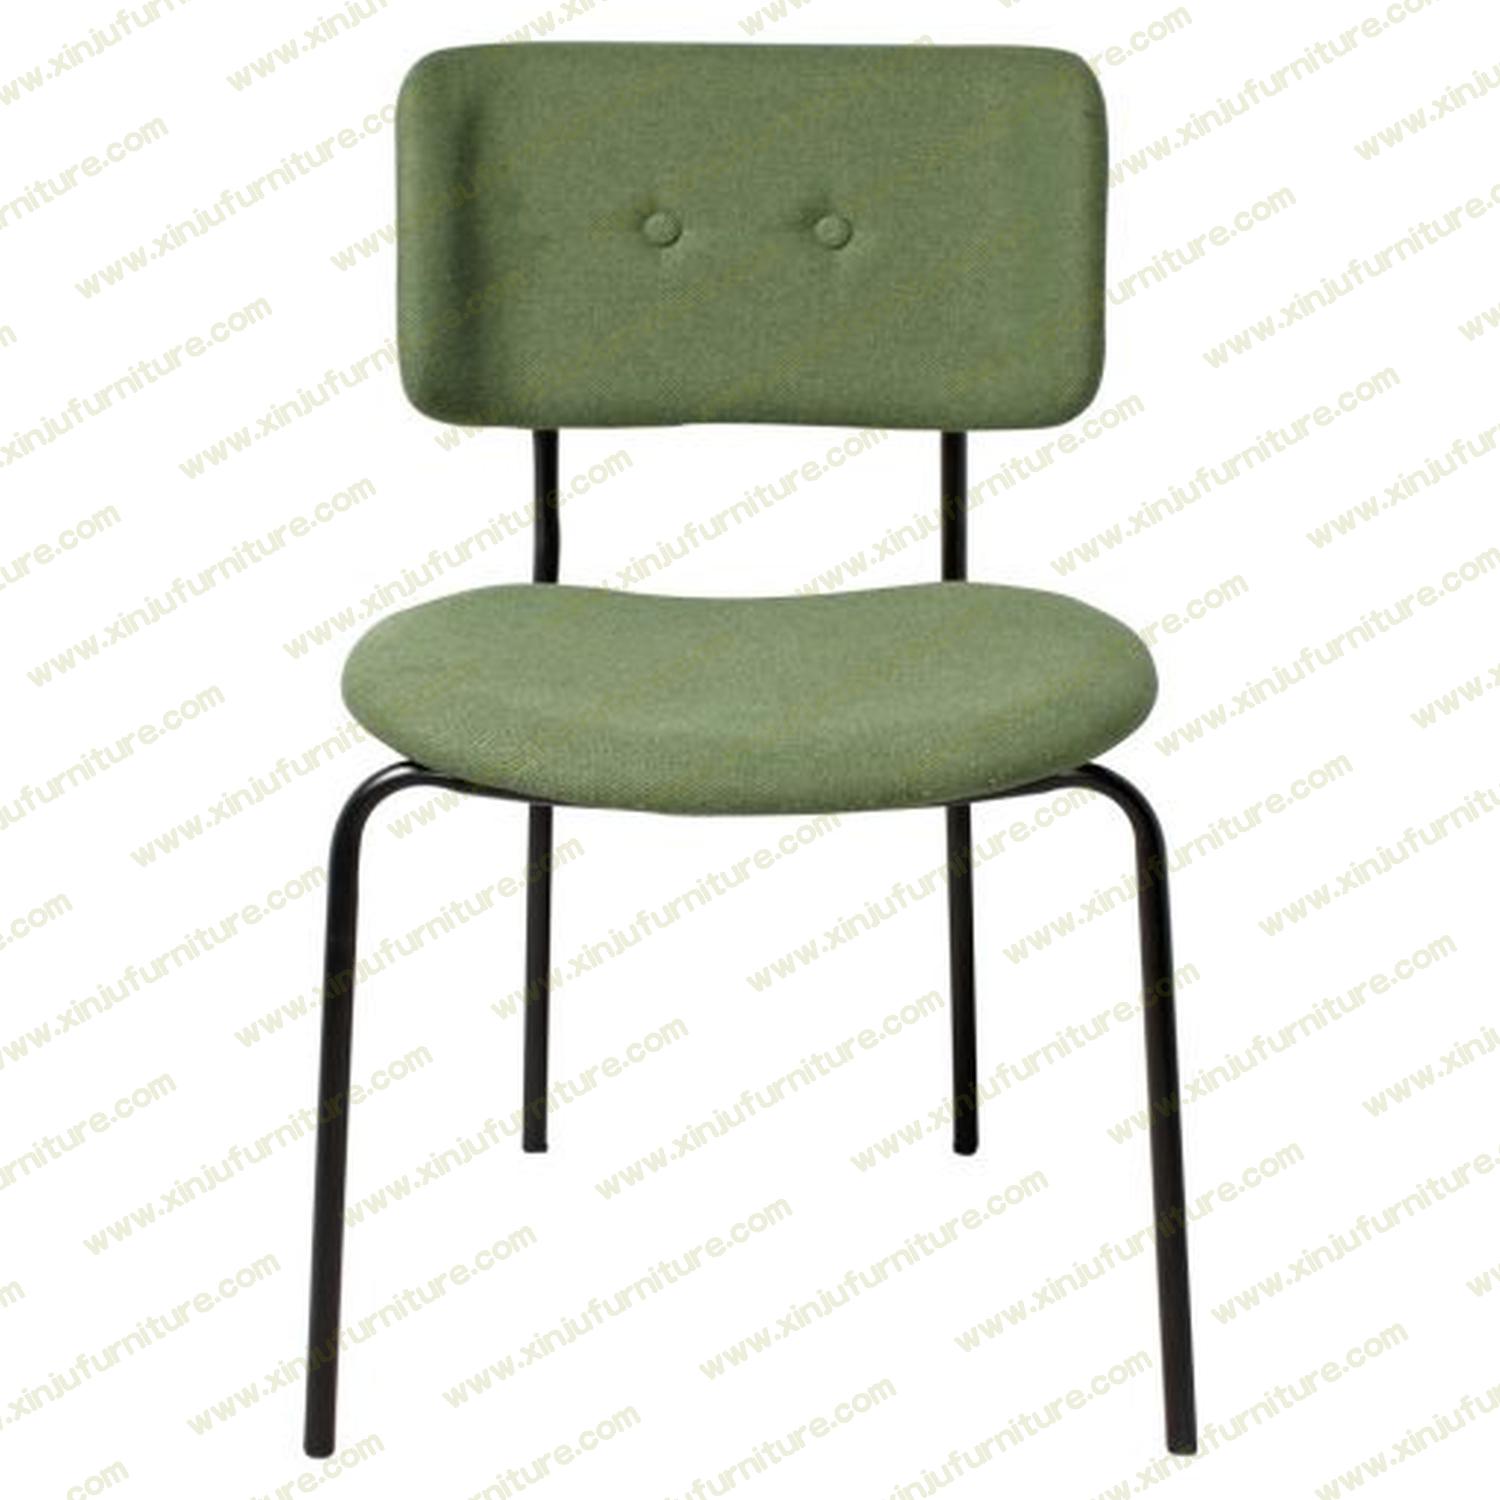 Simple and fashionable household dining chair